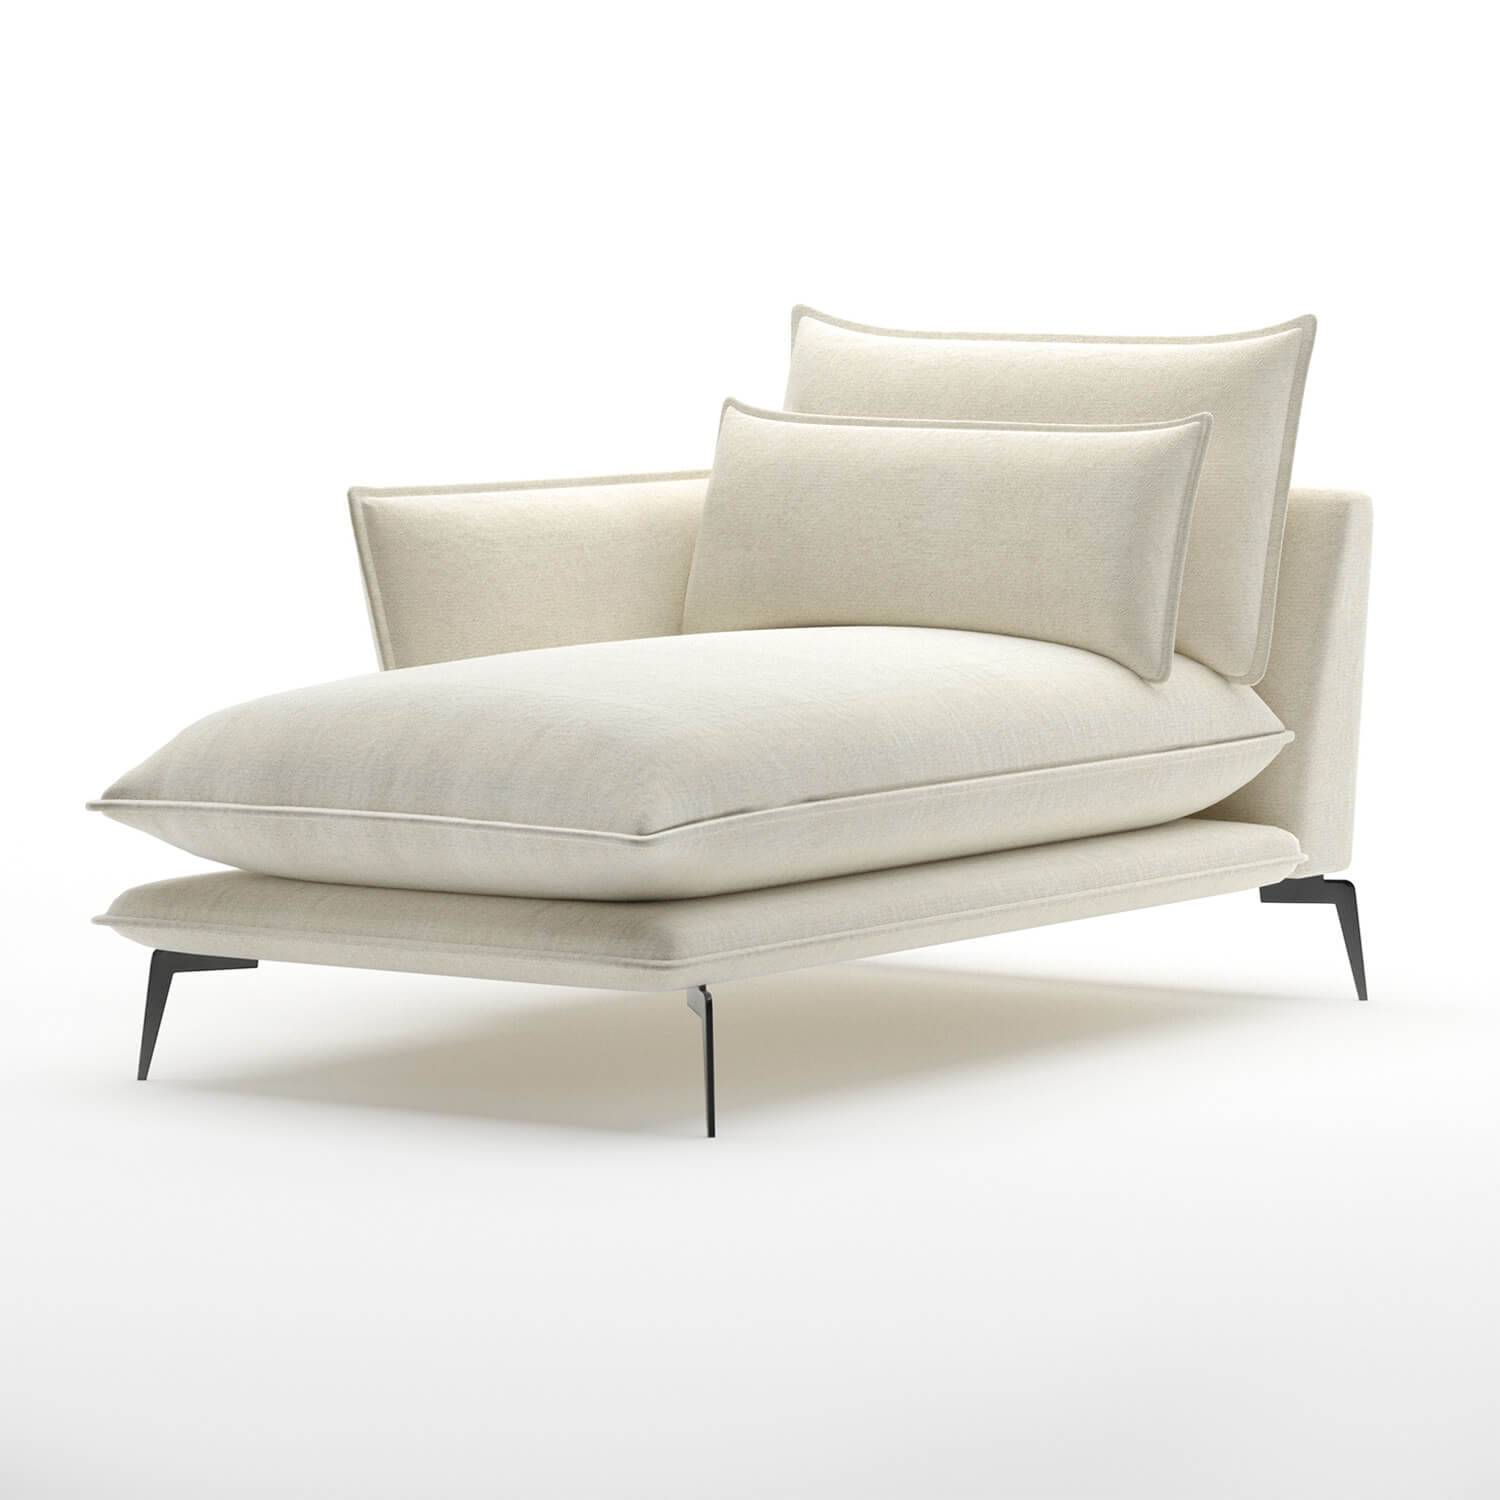 Felicia divan lounge one arm left in off white fabric